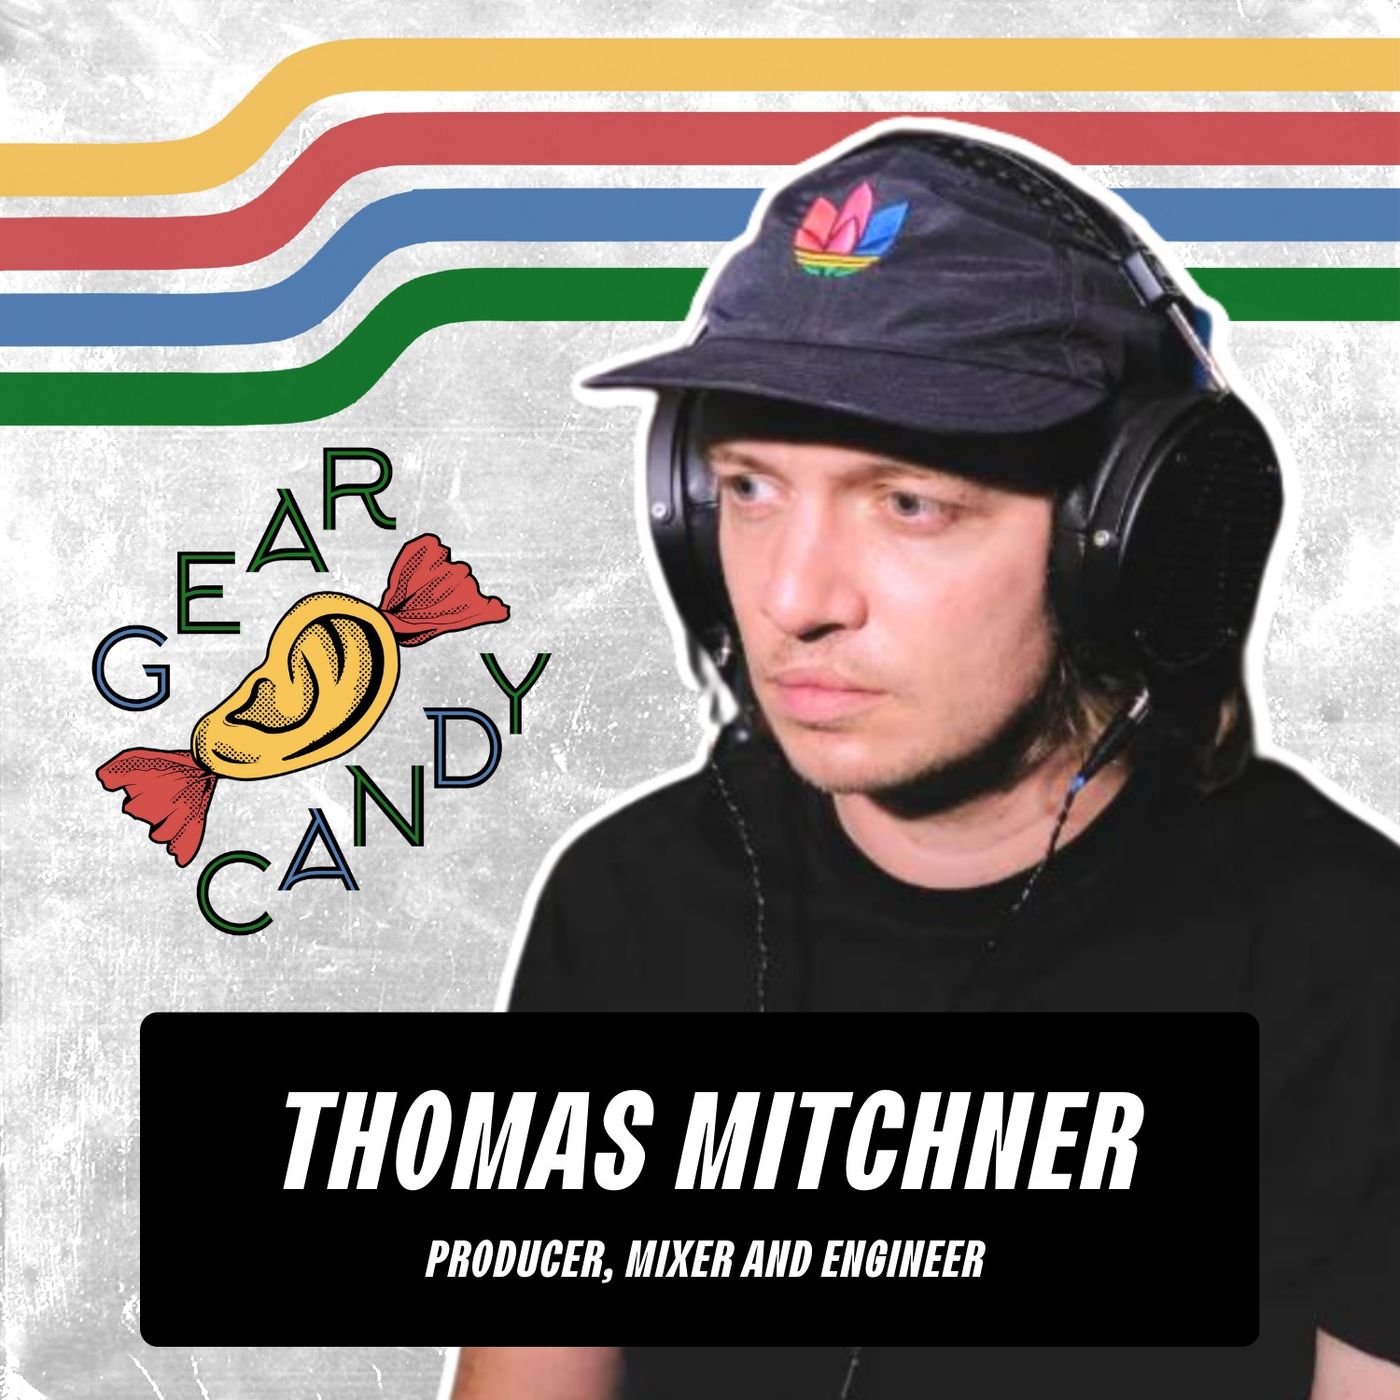 Thomas Mitchener’s Massive Mixing Breakthrough From Funky Junk Gear Candy